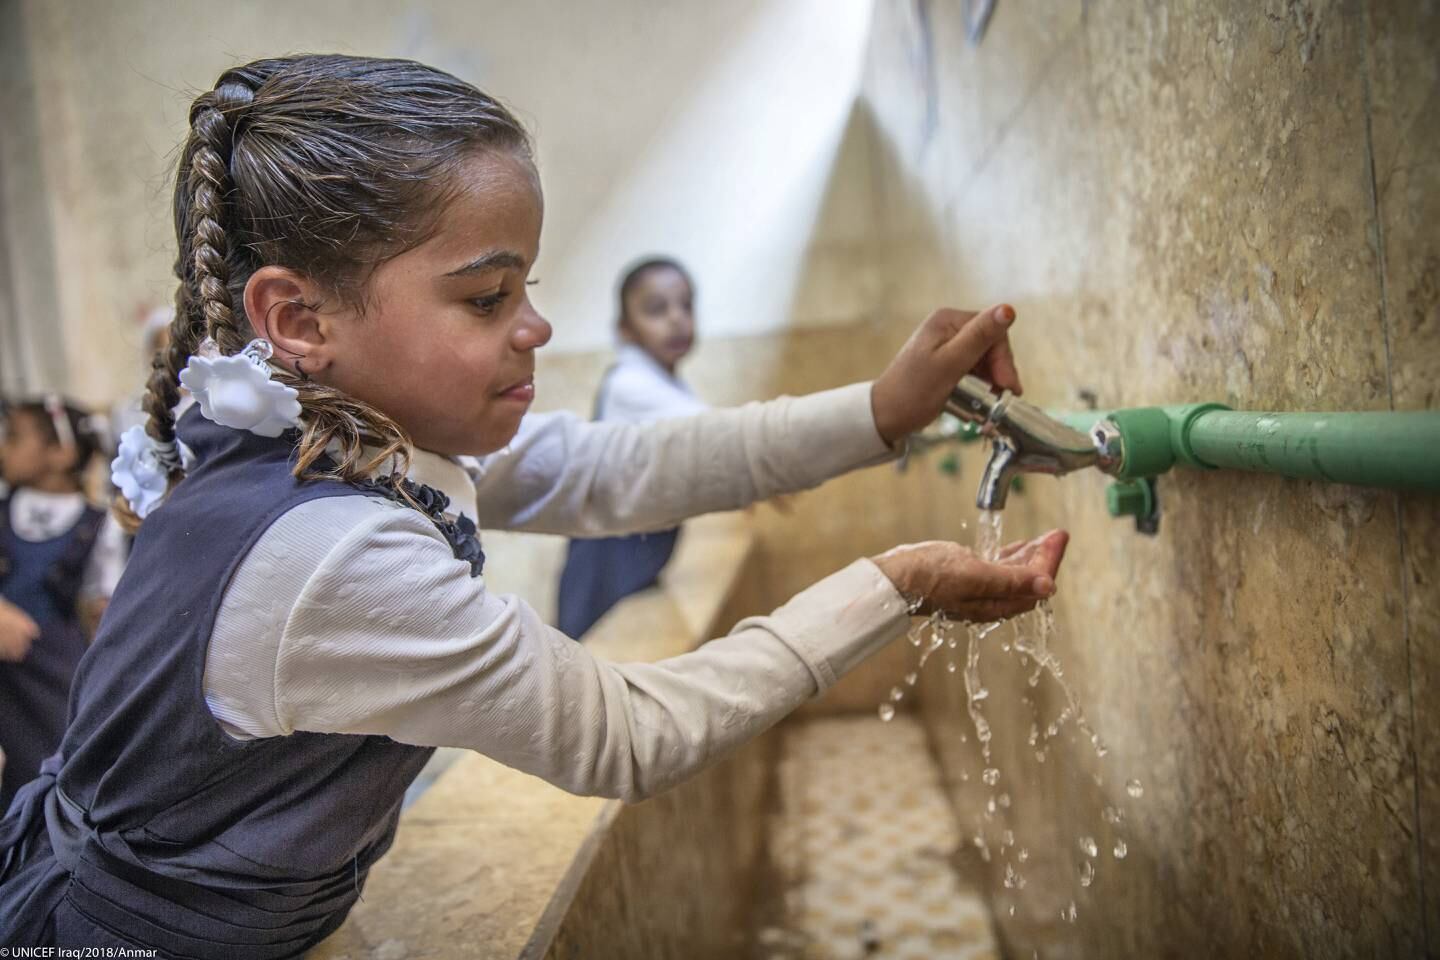 Children in schools using water. Amnar / Unicef Iraq NOTE: For Basra water story